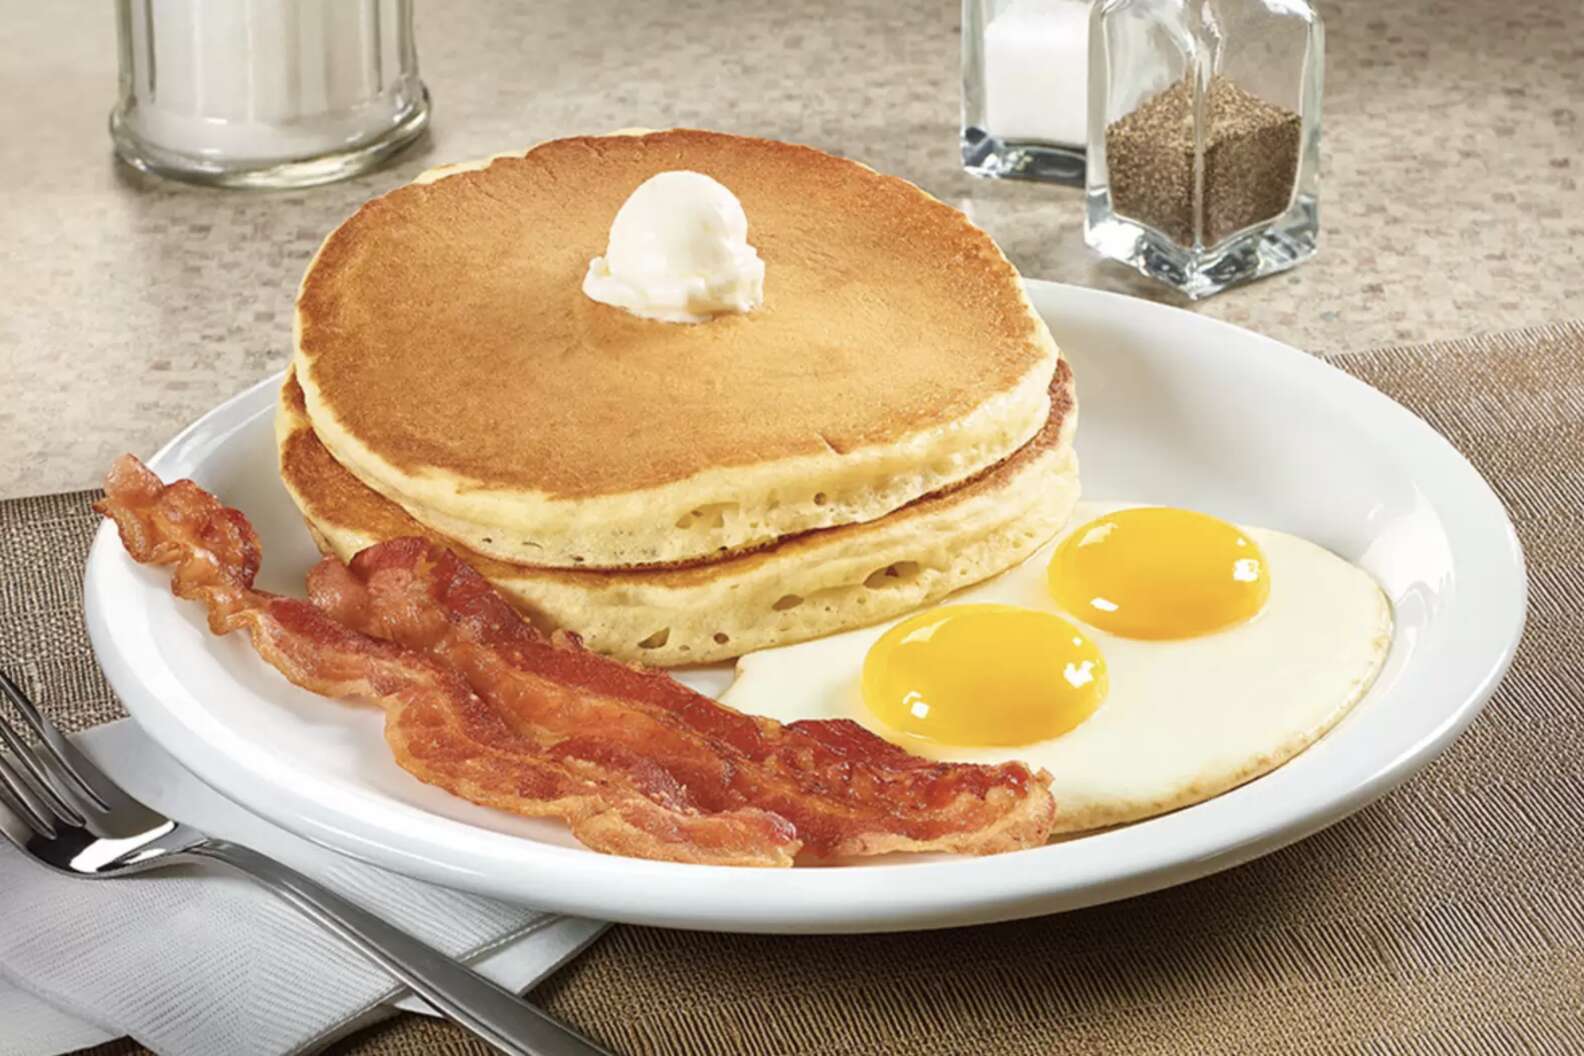 Denny’s Is Giving Us 12 Straight Days of Free Breakfast This Month